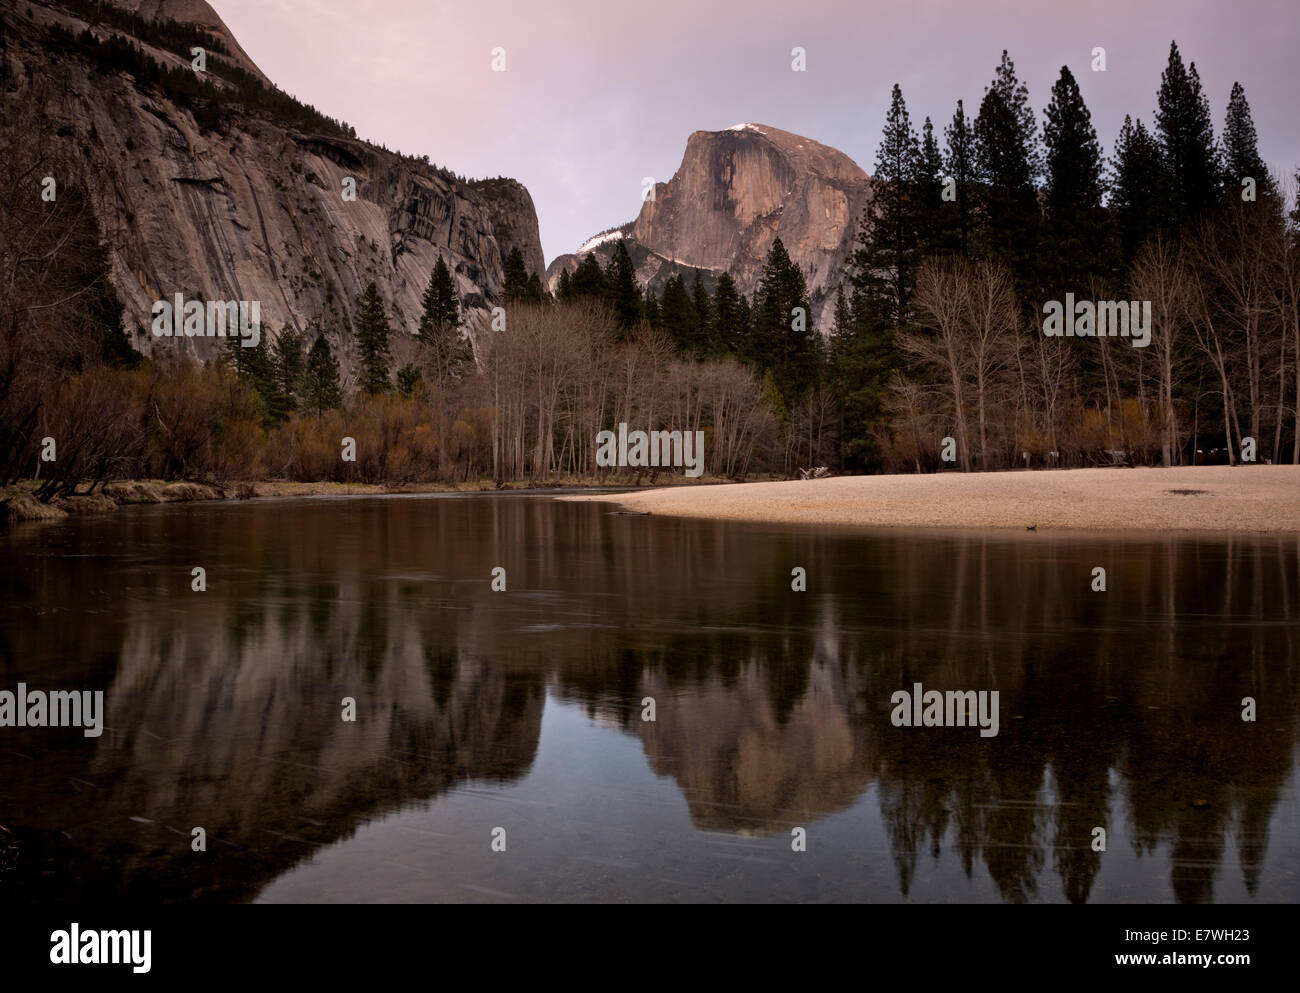 CA02331-00...CALIFORNIA - Half Dome at sunset reflecting in the Merced River in Yosemite National Park. Stock Photo